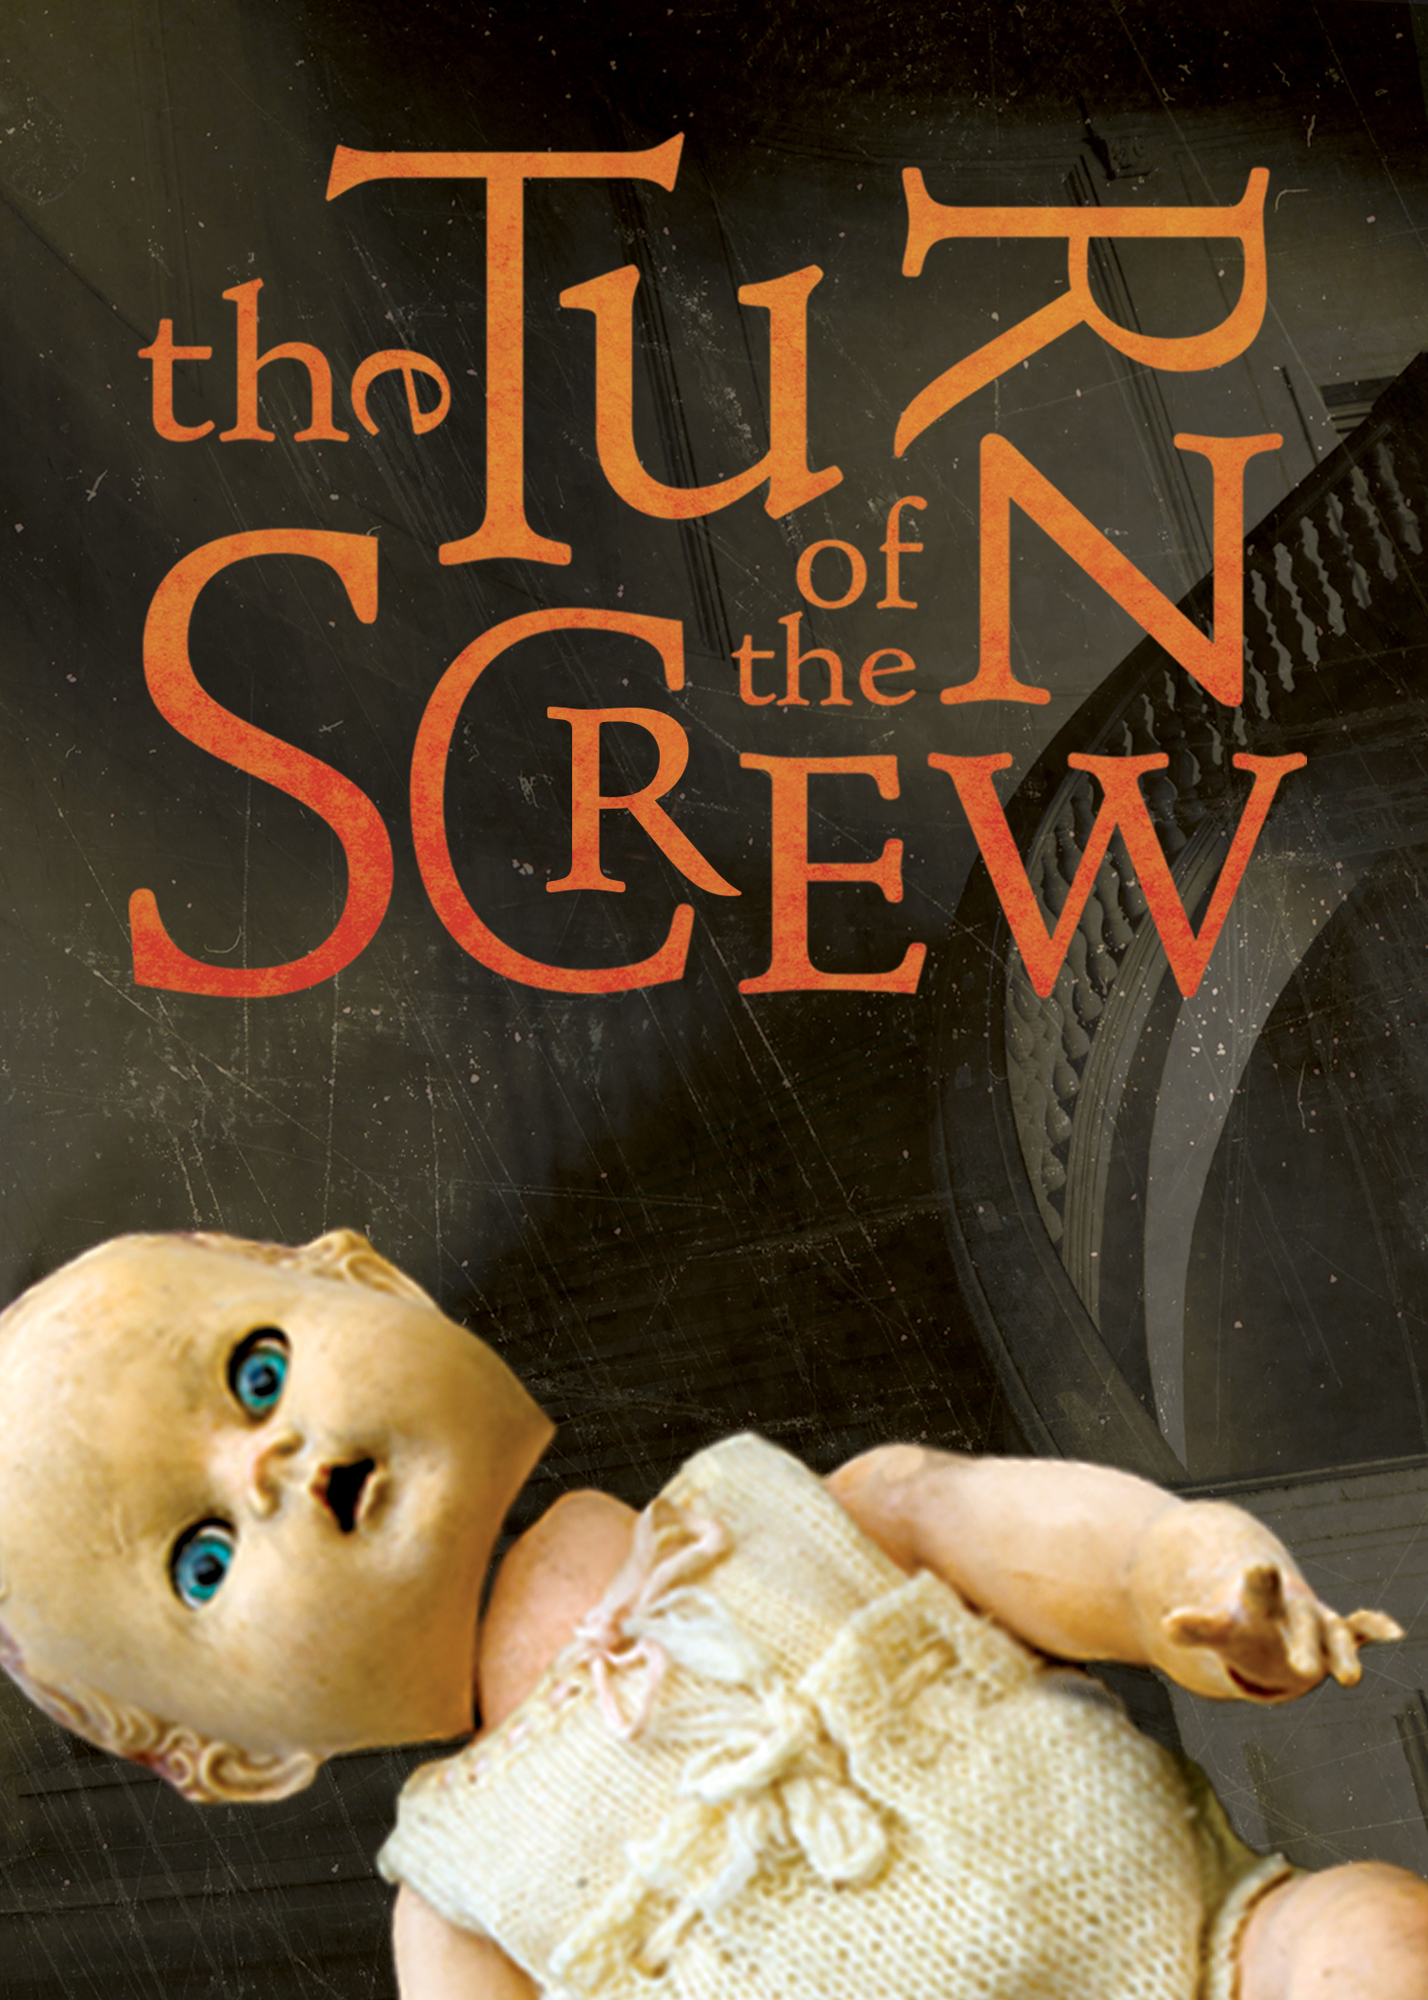 “The Turn of the Screw